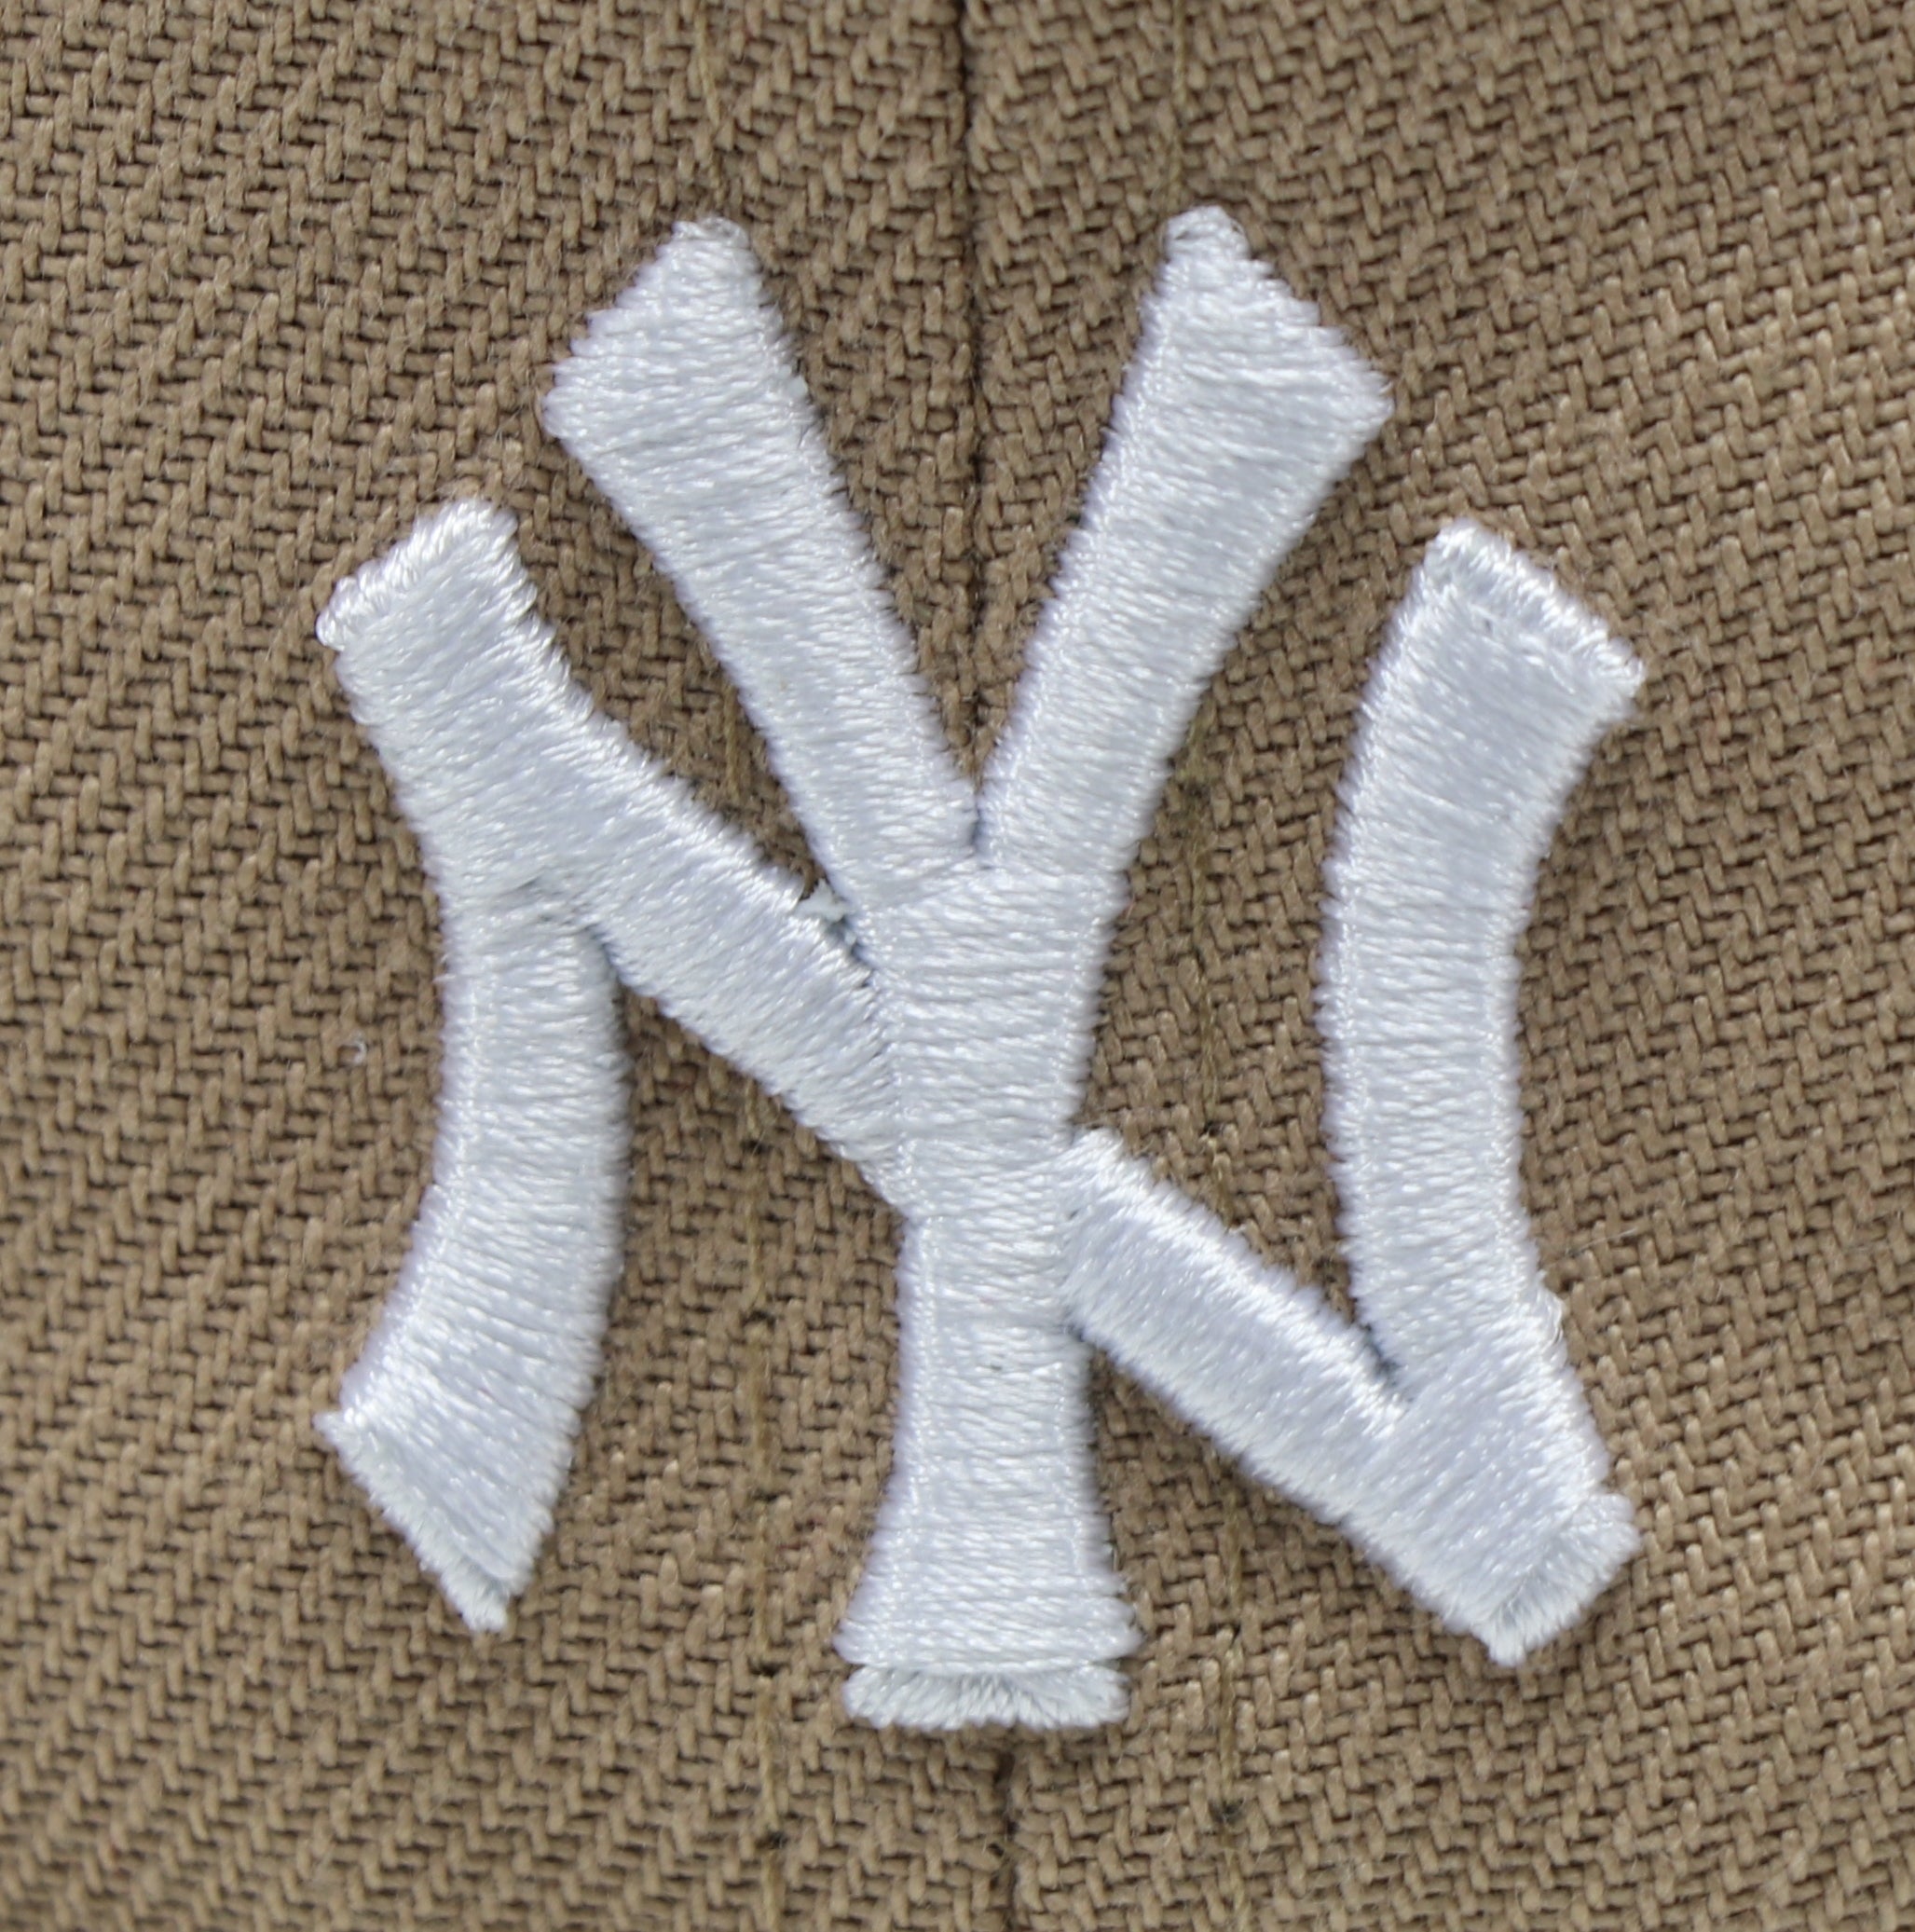 NEW YORK YANKEES (CAMEL ROSES) (2009 INAUGURAL SEASON) NEW ERA 59FIFTY FITTED (RED UNDER VISOR)